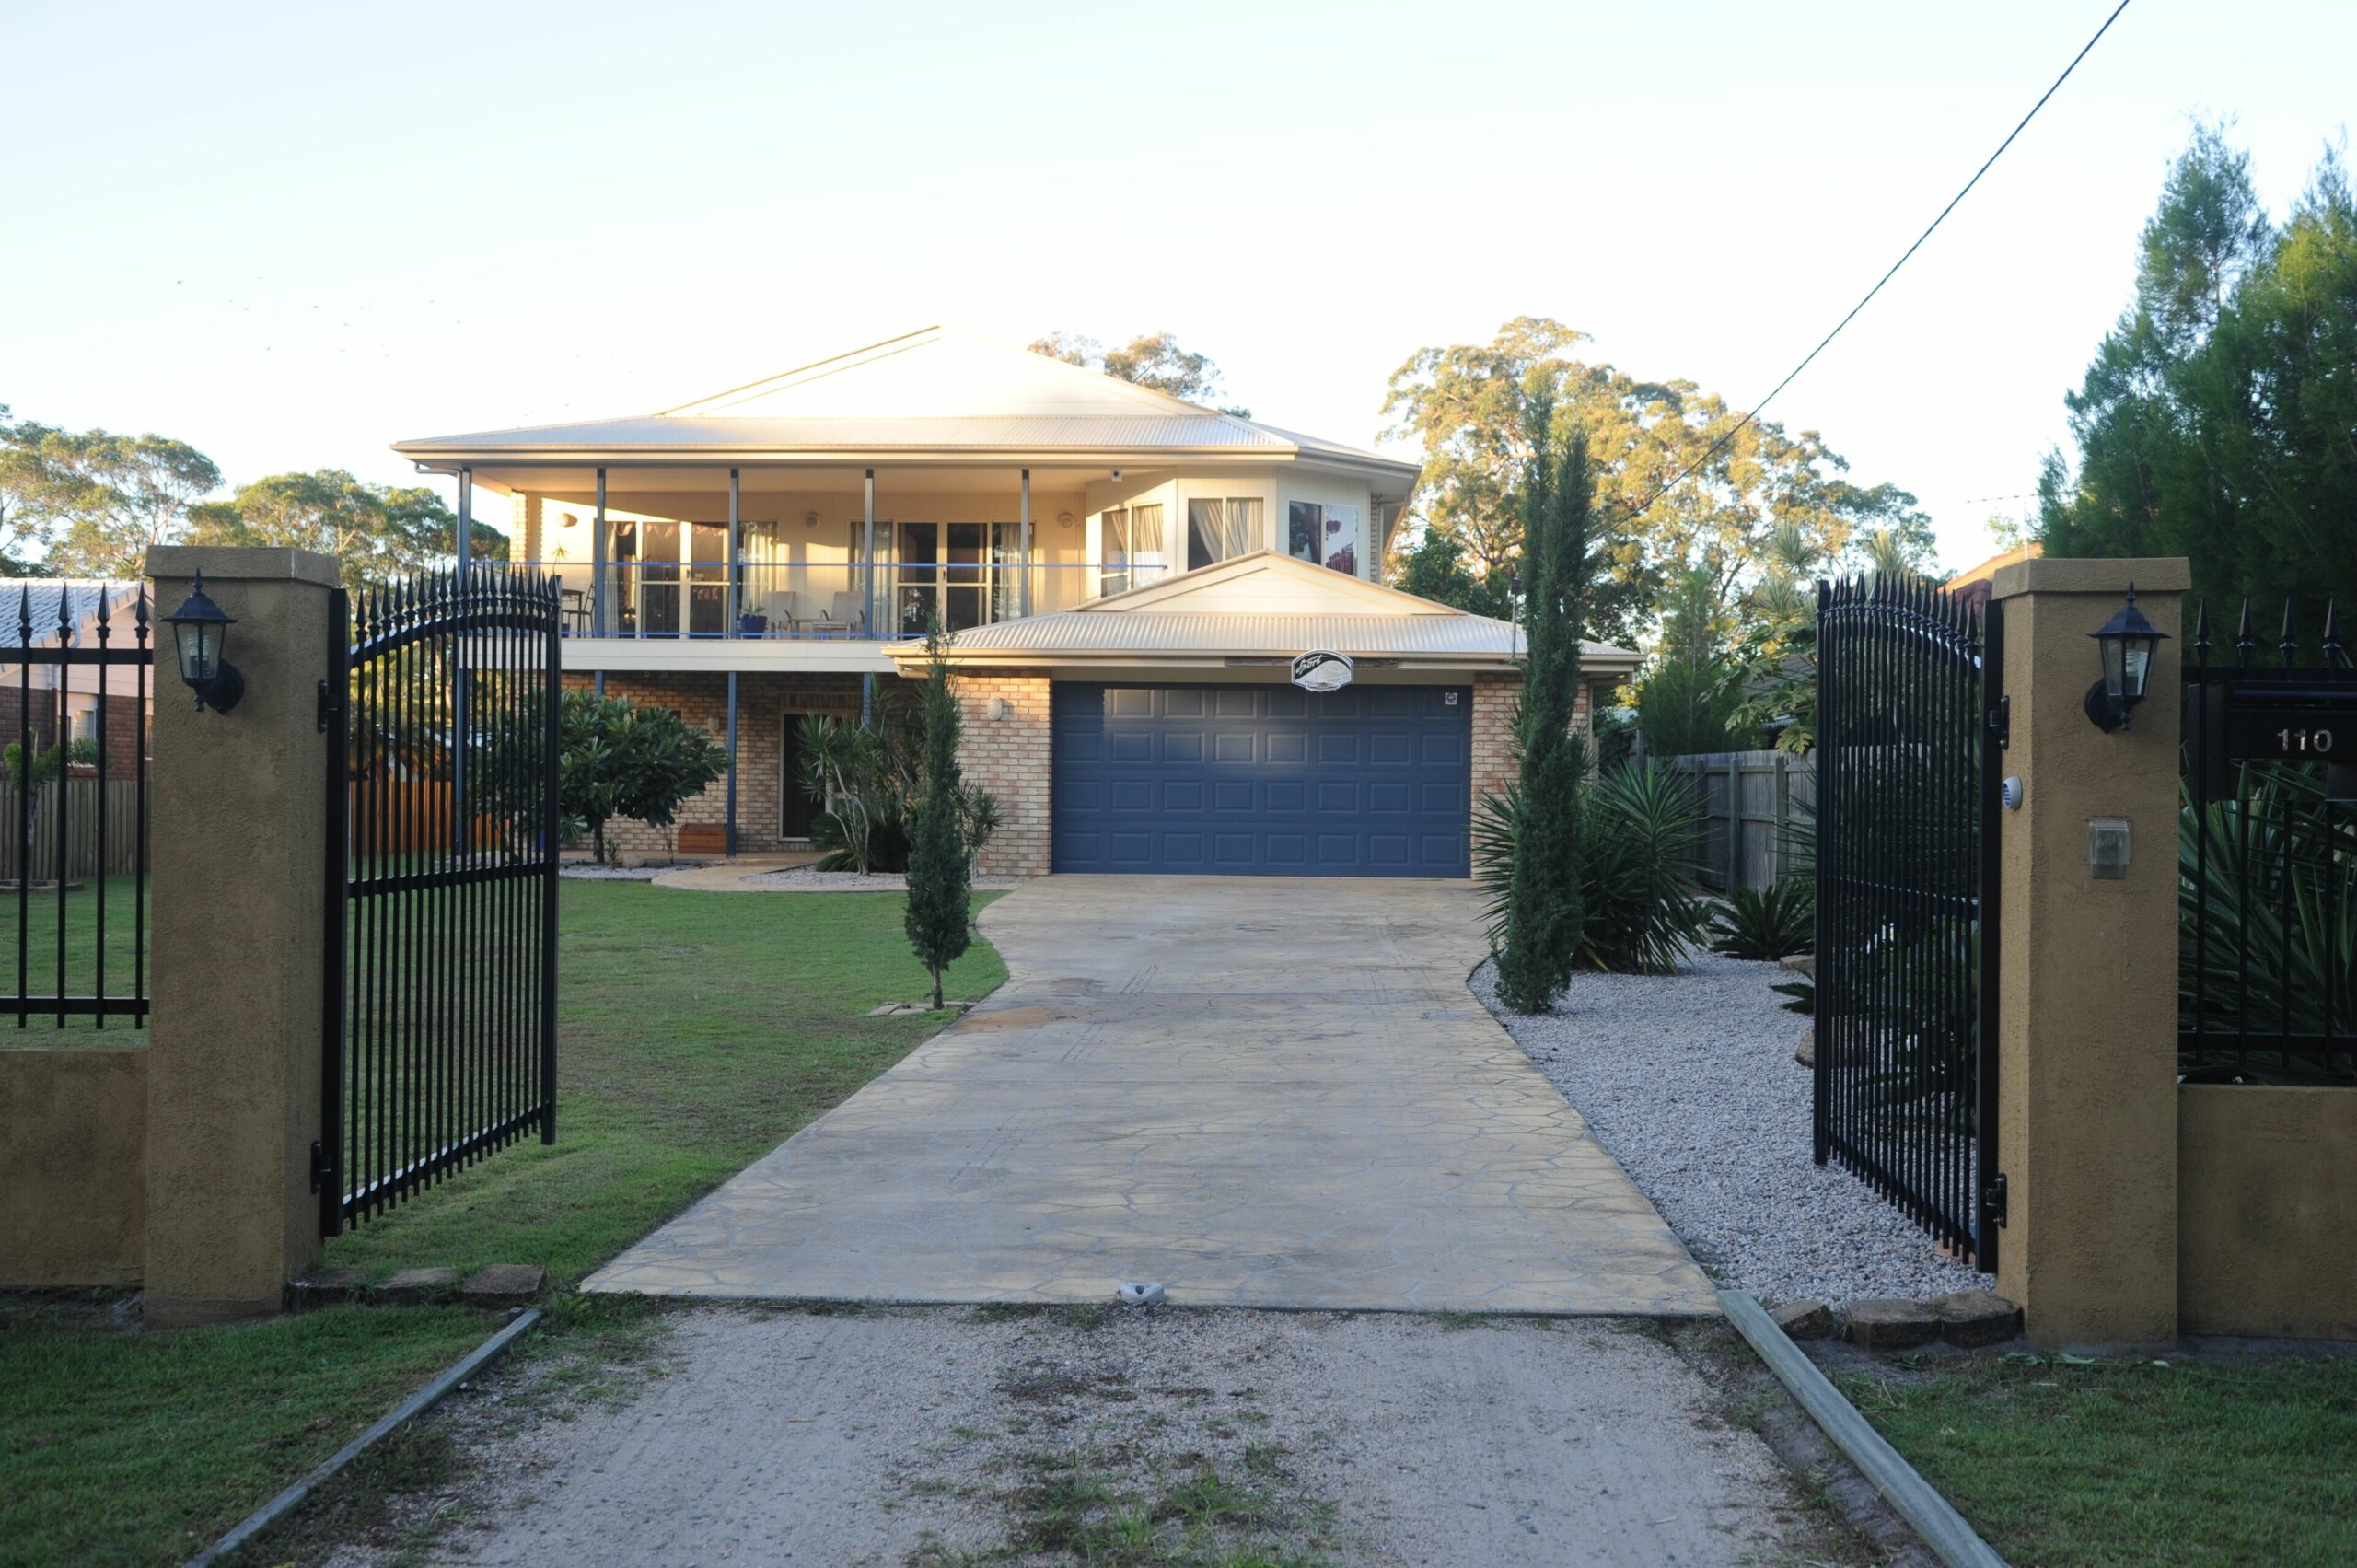 Luxury Family Holiday or Business Retreat on Beautiful Bribie Island